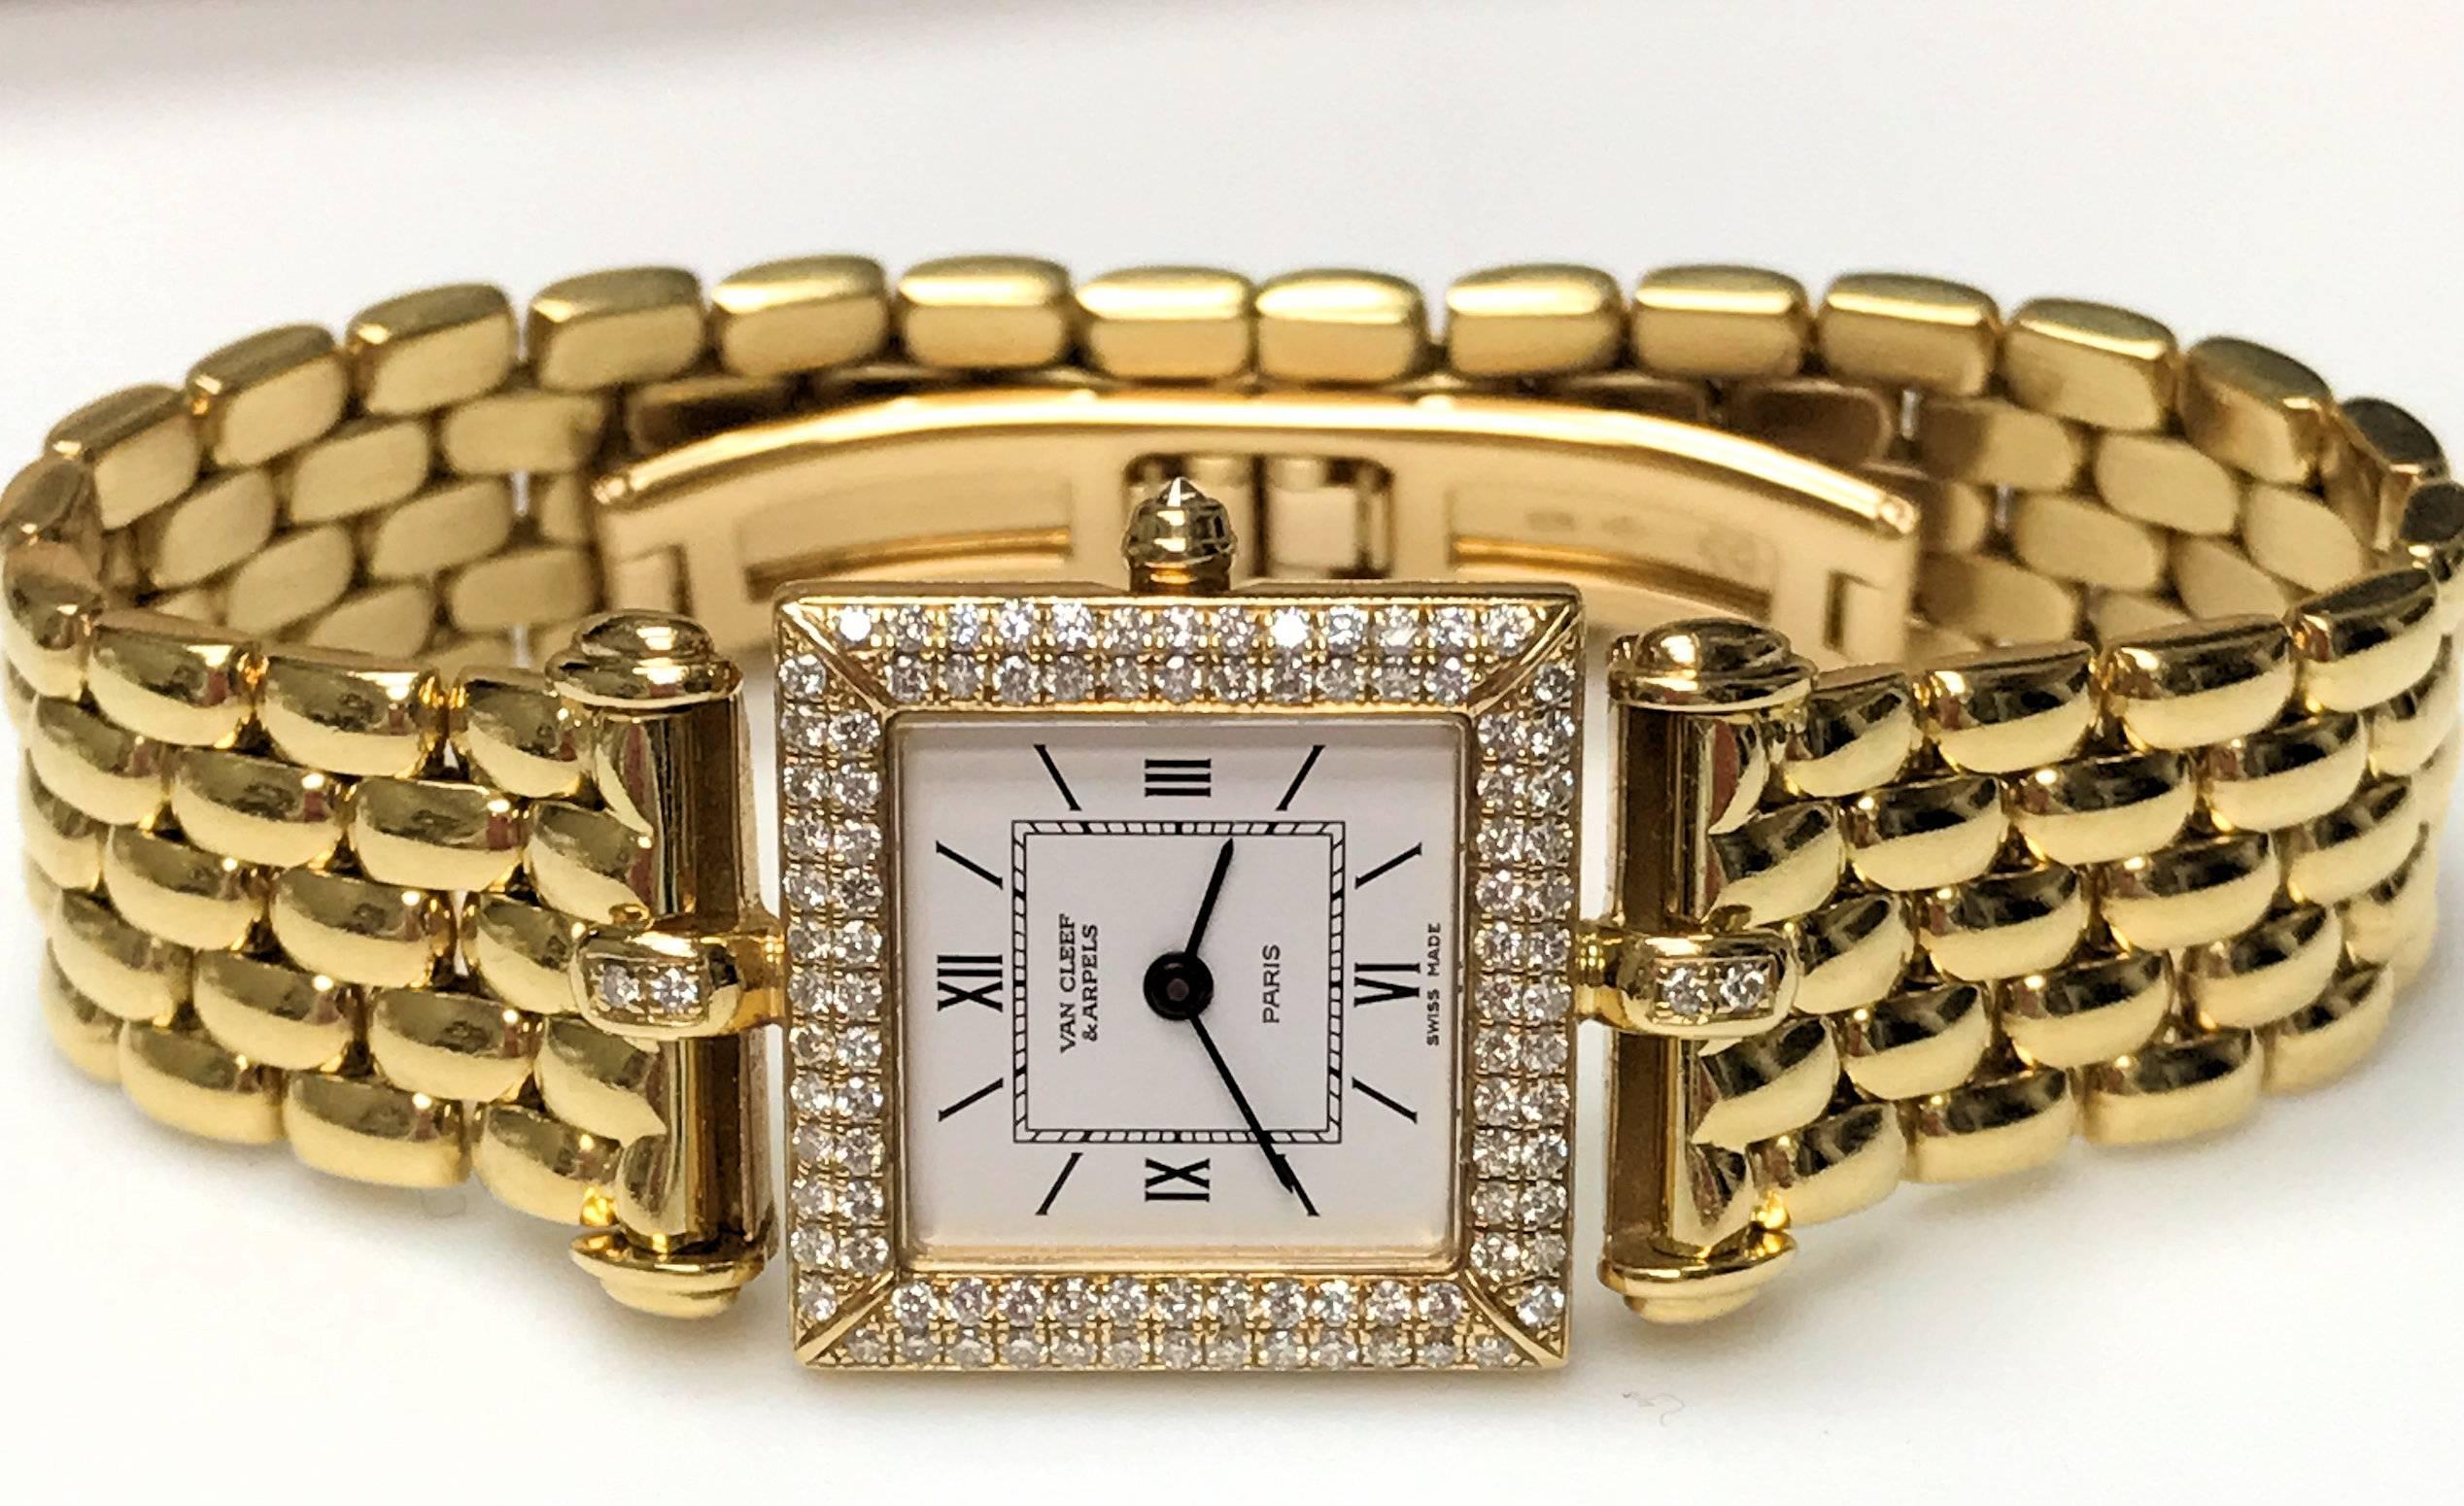 18Karat yellow gold and diamond Van Cleef and Arpels Classique wrist watch.  Five row panther link bracelet with deployant clasp.  100 round diamonds with a total weight of approximately 0.80 carat VVS-2, G. Quartz movement, recently replaced